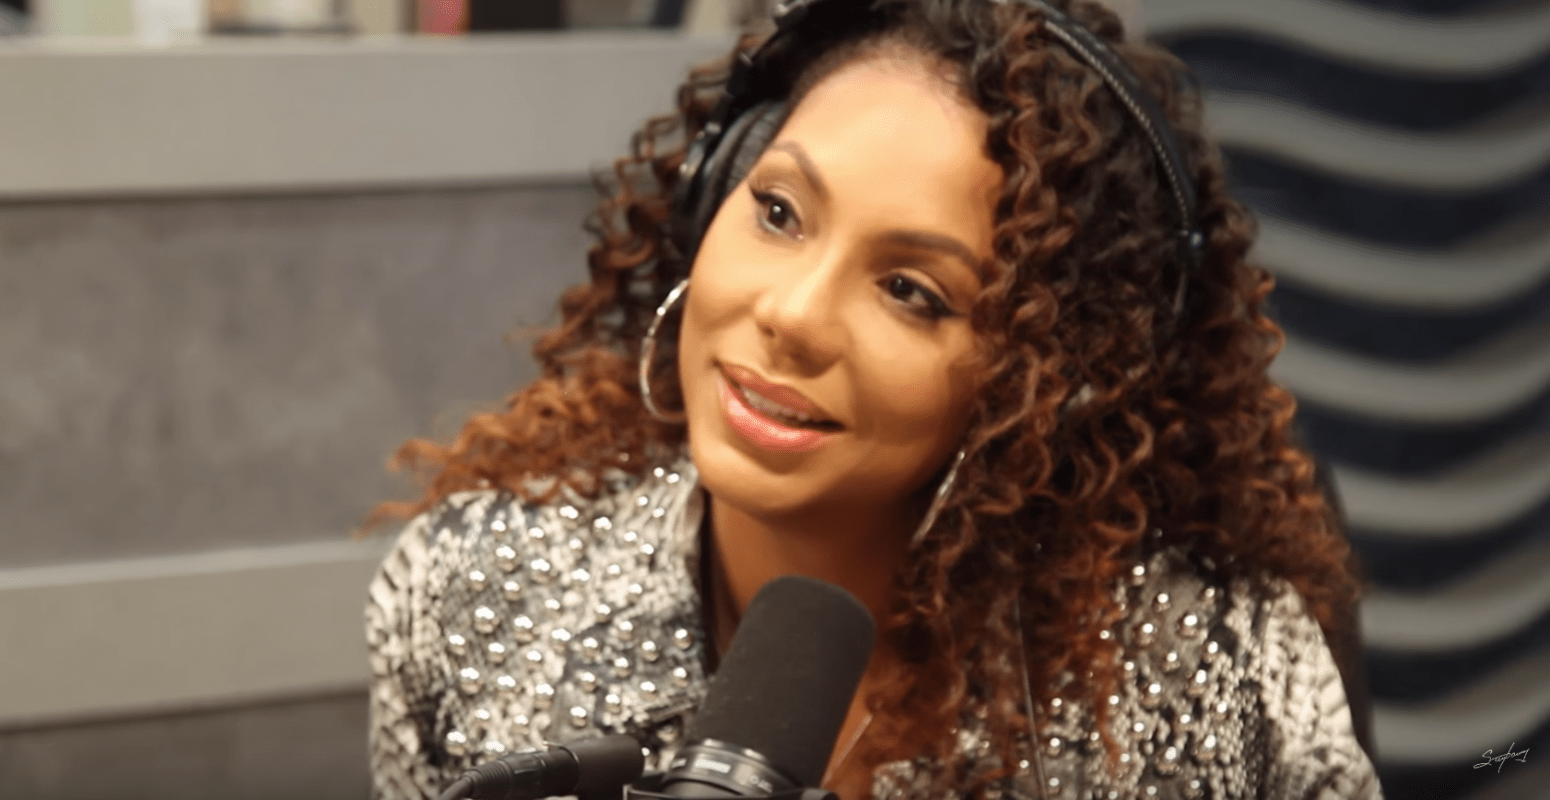 Tamar Braxton His An All-Time Low And Tells Fans She's Never Been This Raggedy - Check Out Her Photo